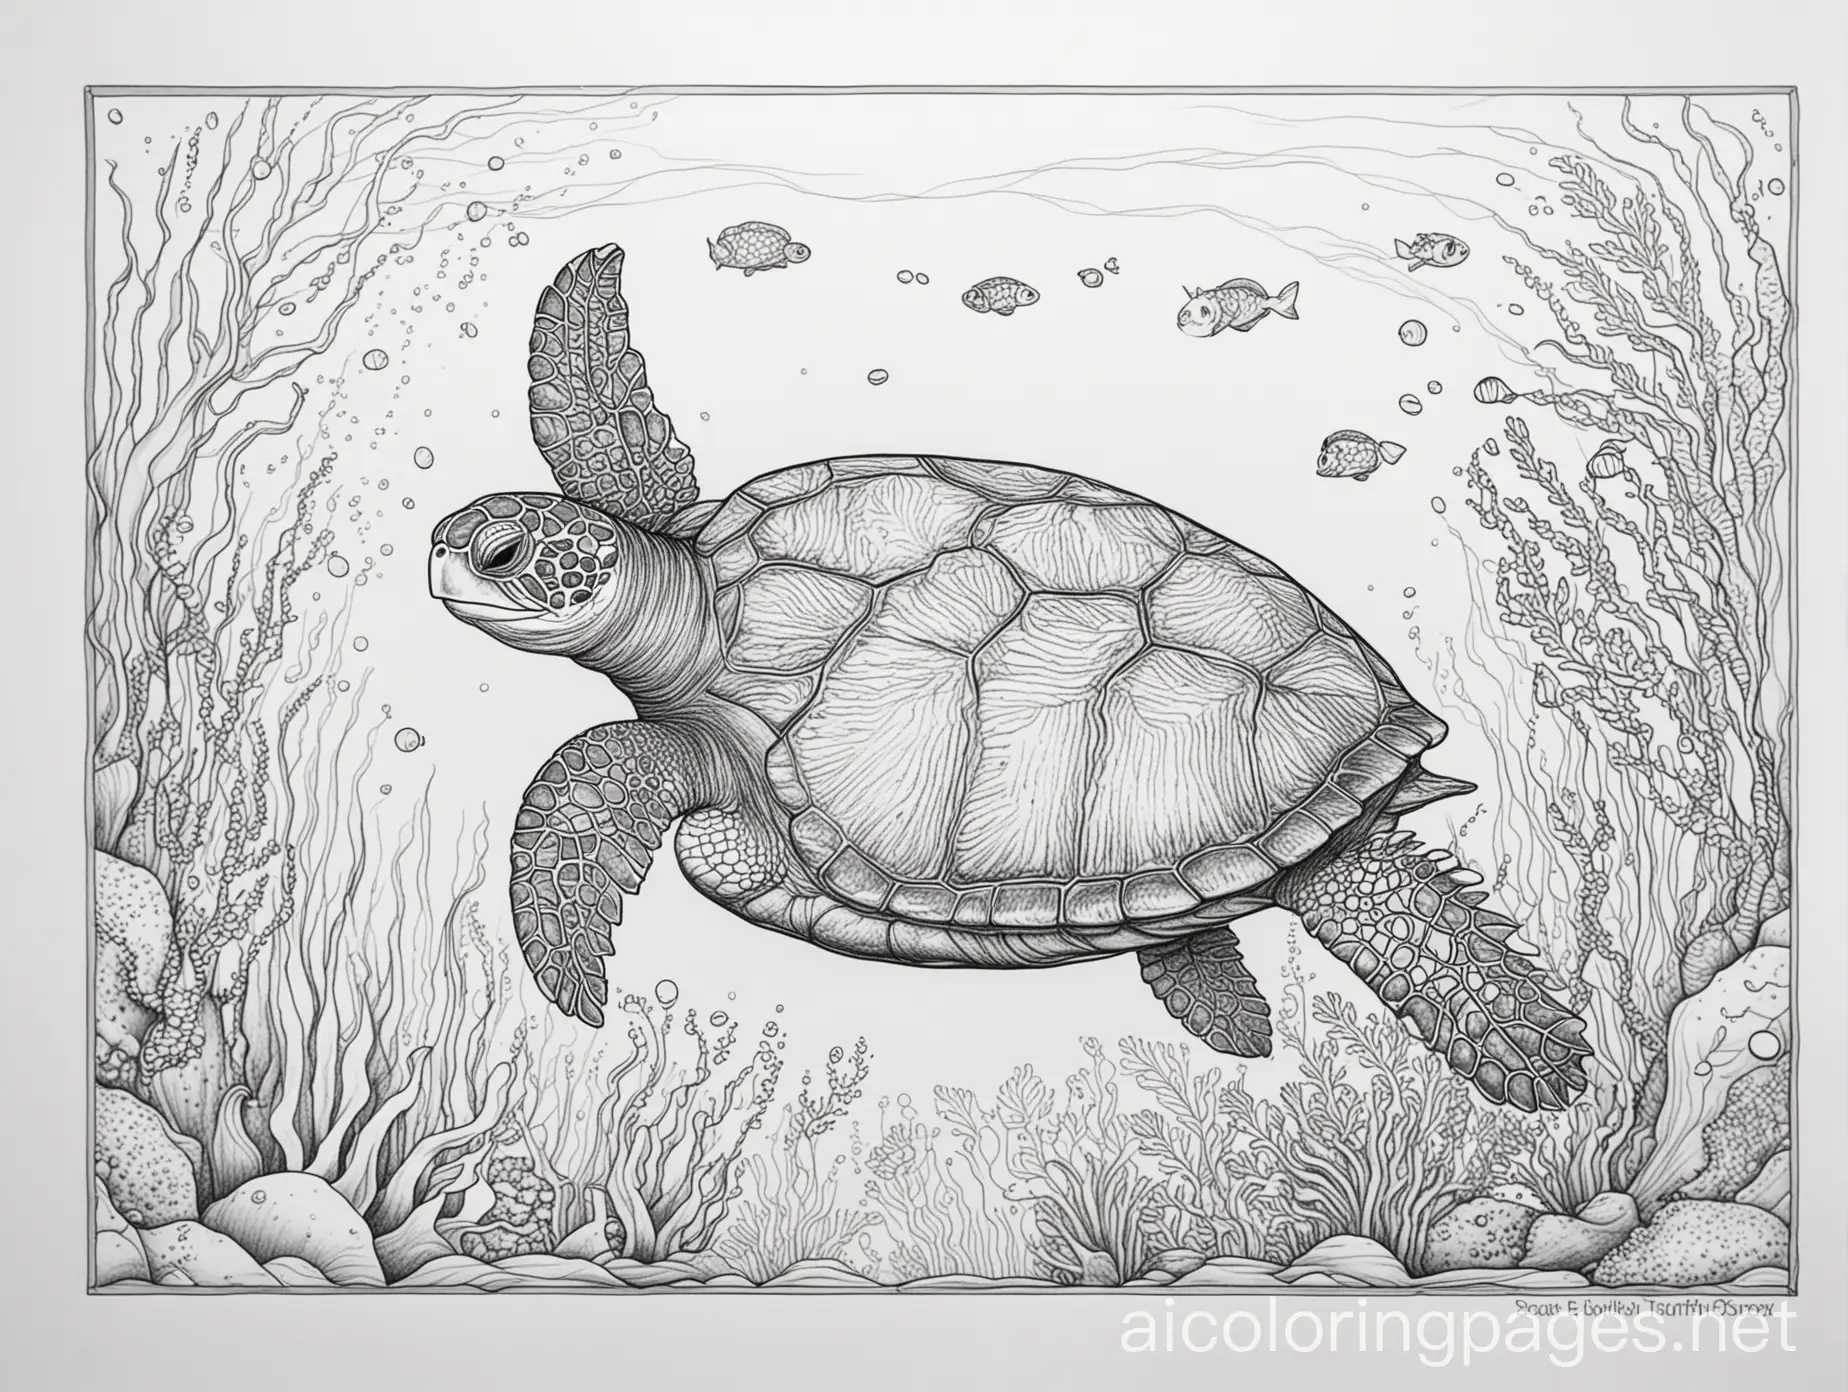 under the sea turtle asymetrical image, Coloring Page, black and white, line art, white background, Simplicity, Ample White Space. The background of the coloring page is plain white to make it easy for young children to color within the lines. The outlines of all the subjects are easy to distinguish, making it simple for kids to color without too much difficulty